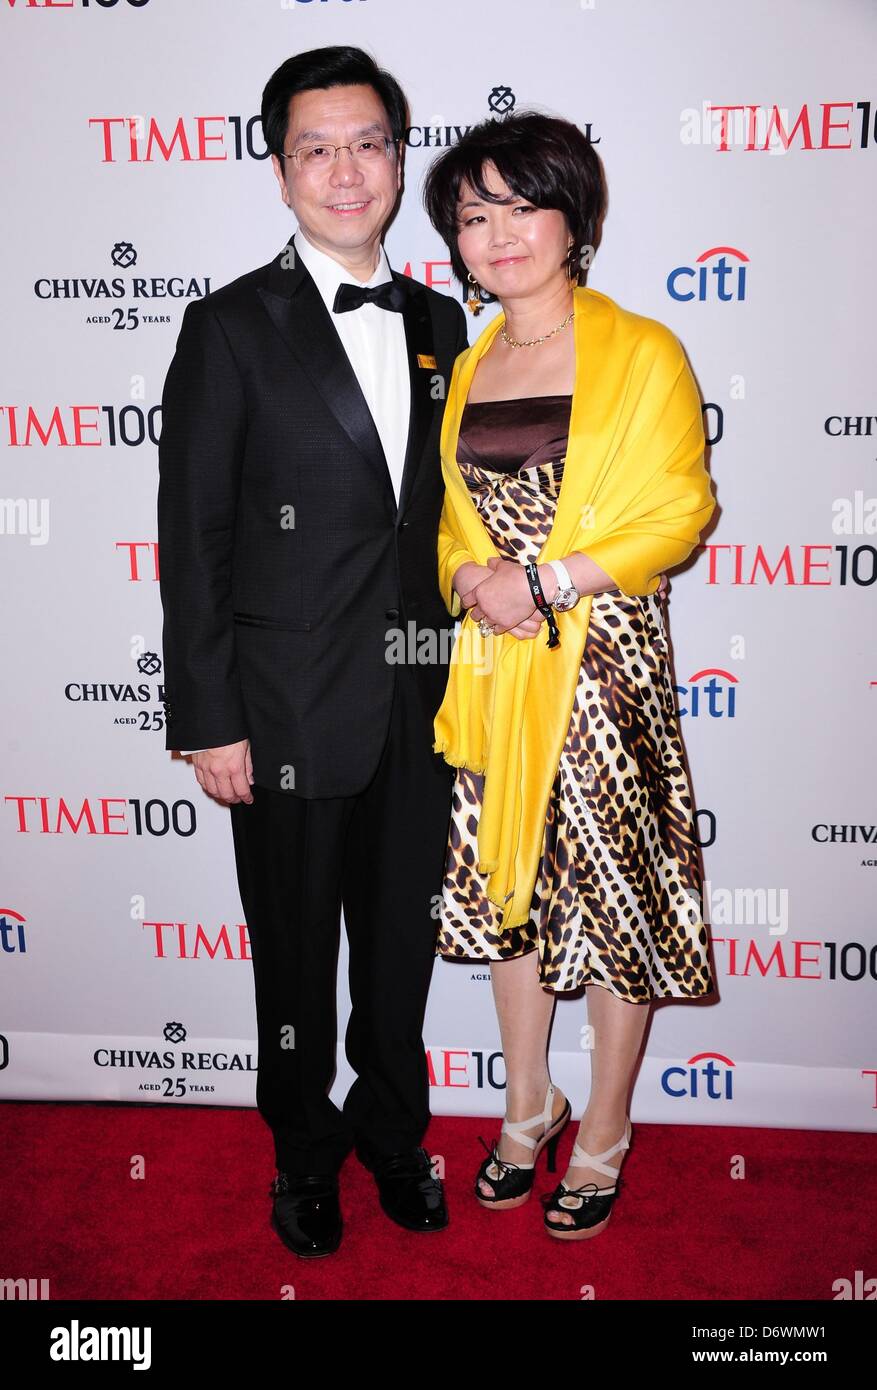 New York, USA. 23rd April, 2013. Kai-Fu Lee at arrivals for TIME 100 Gala,  Frederick P. Rose Hall, Jazz at Lincoln Center, New York, NY April 23,  2013. Photo By: Gregorio T.